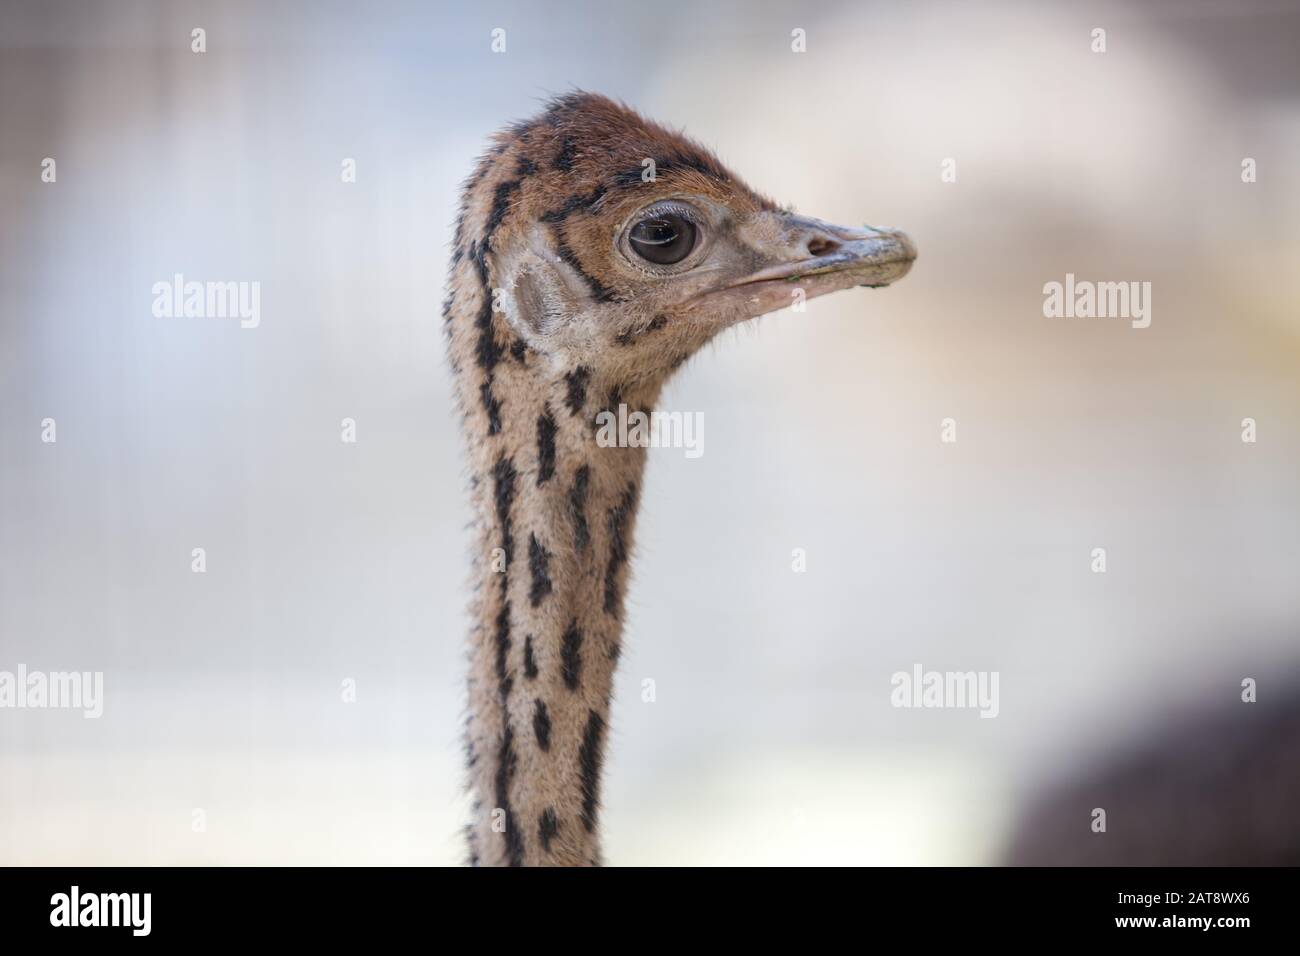 a portrait of a young ostrich chick (Struthio camelus) Stock Photo